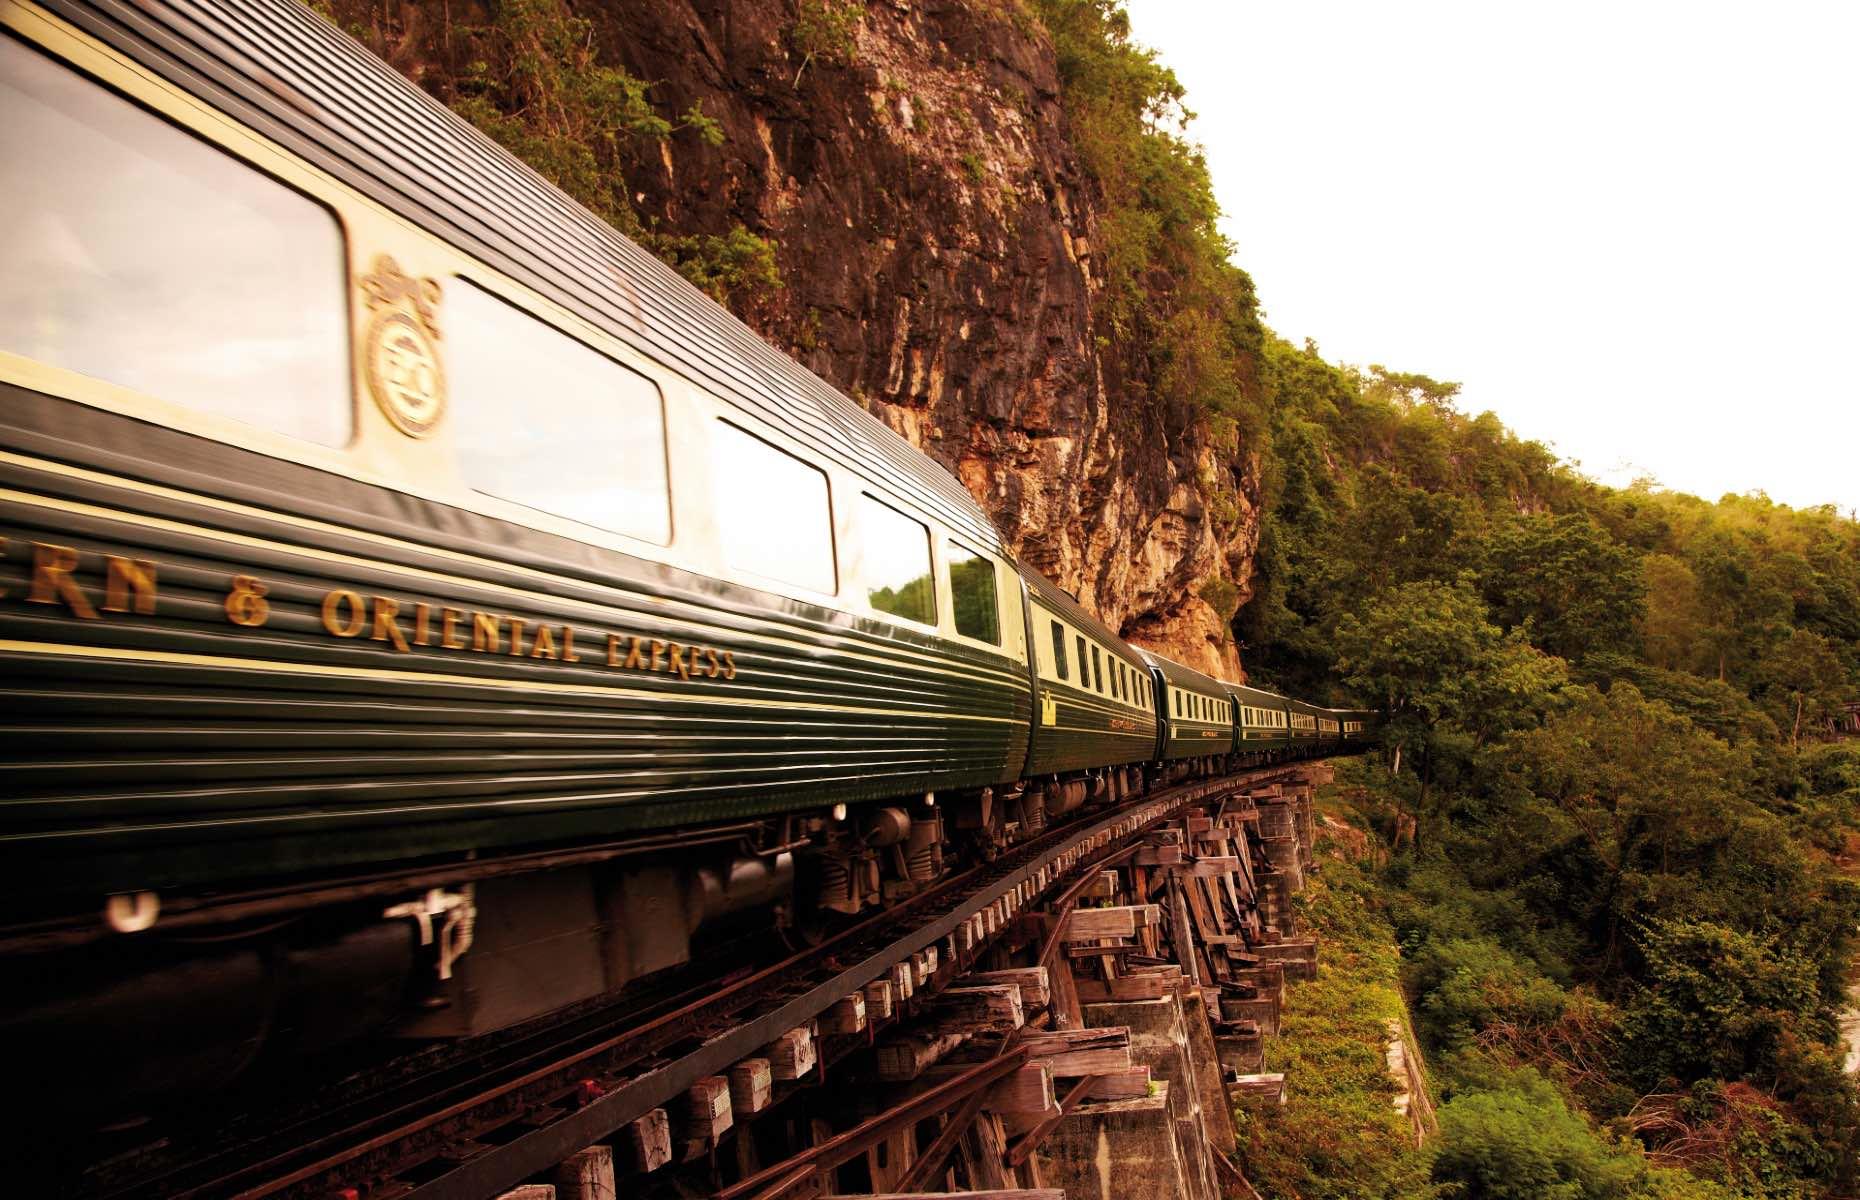 <p>Inspired by the 1930s Marlene Dietrich film <em>Shanghai Express</em>, <a href="https://www.belmond.com/trains/asia/eastern-and-oriental-express/">this legendary sleeper train</a> transports guests back to the golden era of rail travel. Journeying through Southeast Asia, these green and gold carriages take passengers on a two- or three-night trip between the big hitting cities of Bangkok, Kuala Lumpur and Singapore, with many journeys including a guided cultural tour or cruise along the river Kwai, en route.</p>